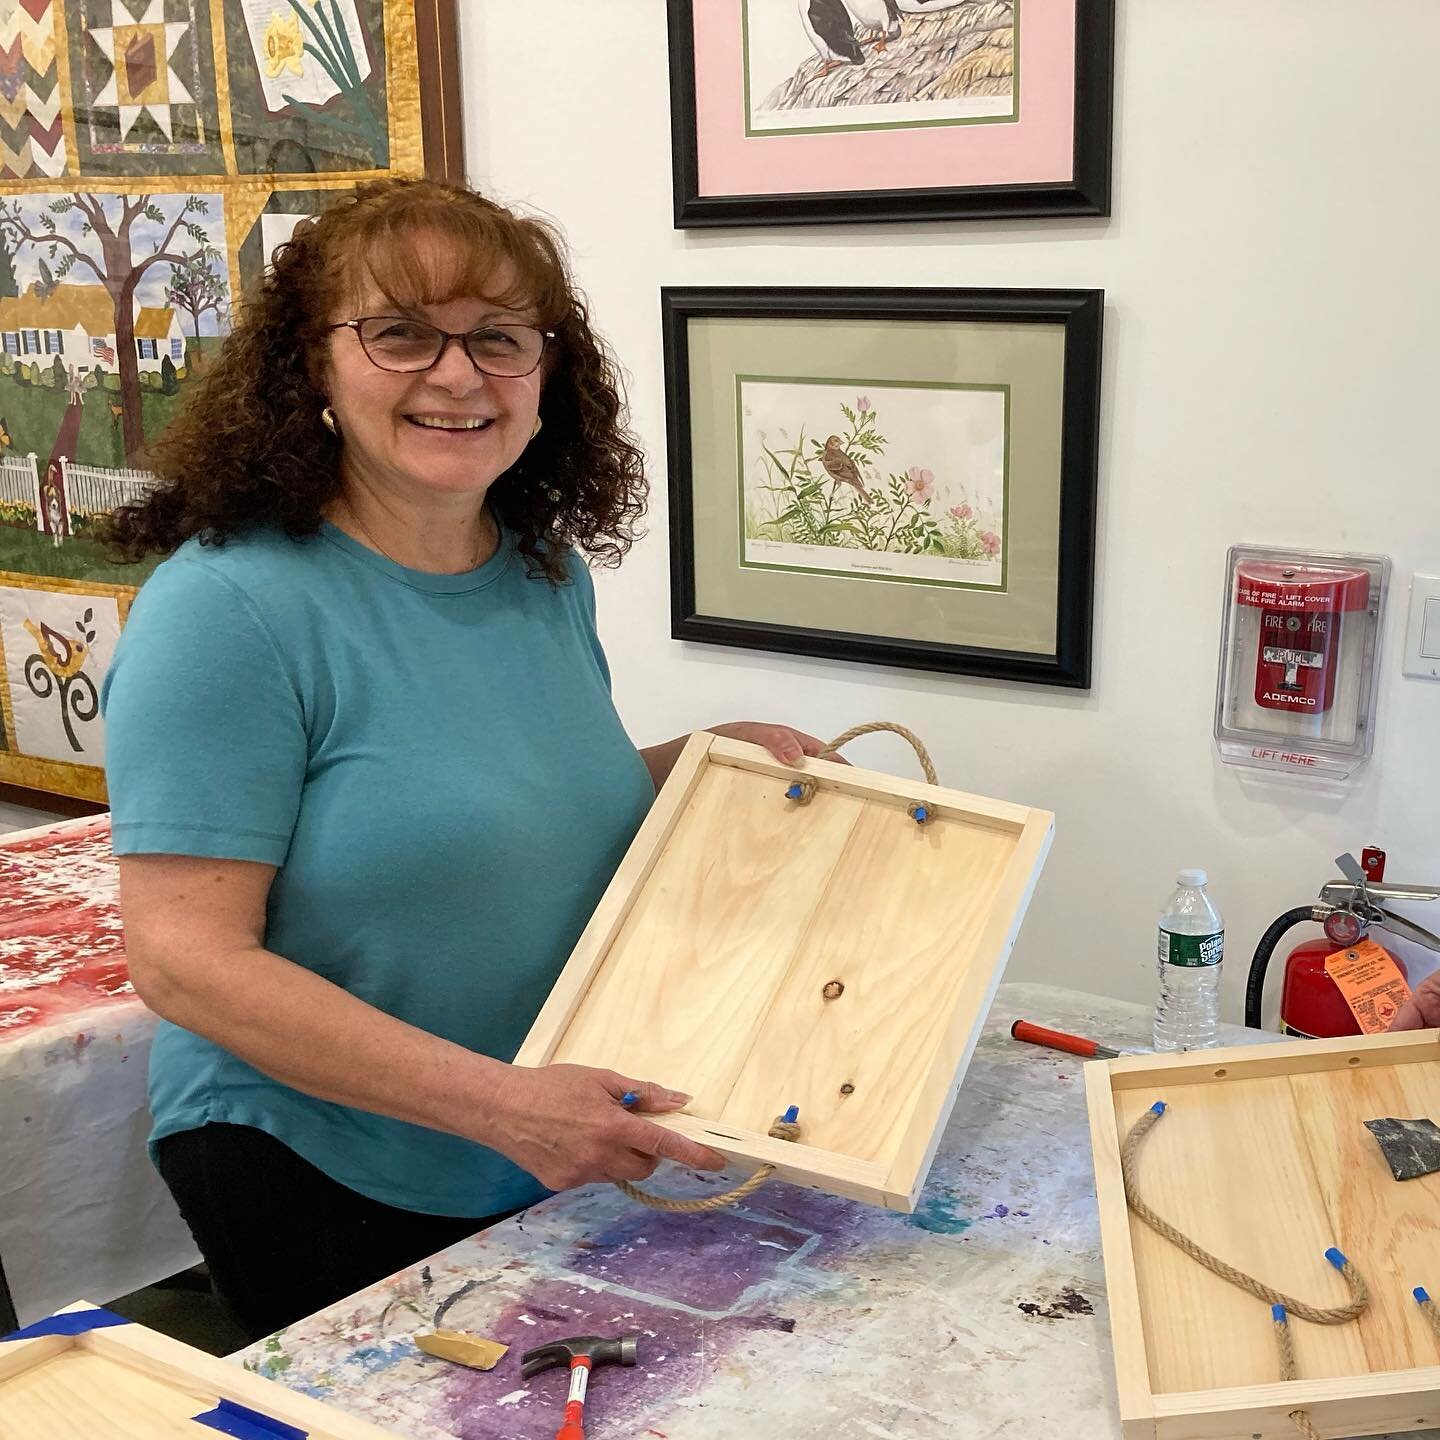 Woodshop Wednesday at @brookhavenfreelibrary. Spring is in the air. Tonight we made serving trays. The crew learned a fun trick - how to use glue in place of a clamp. When the workshop finished, a patron thanked me for giving her courage to try new t